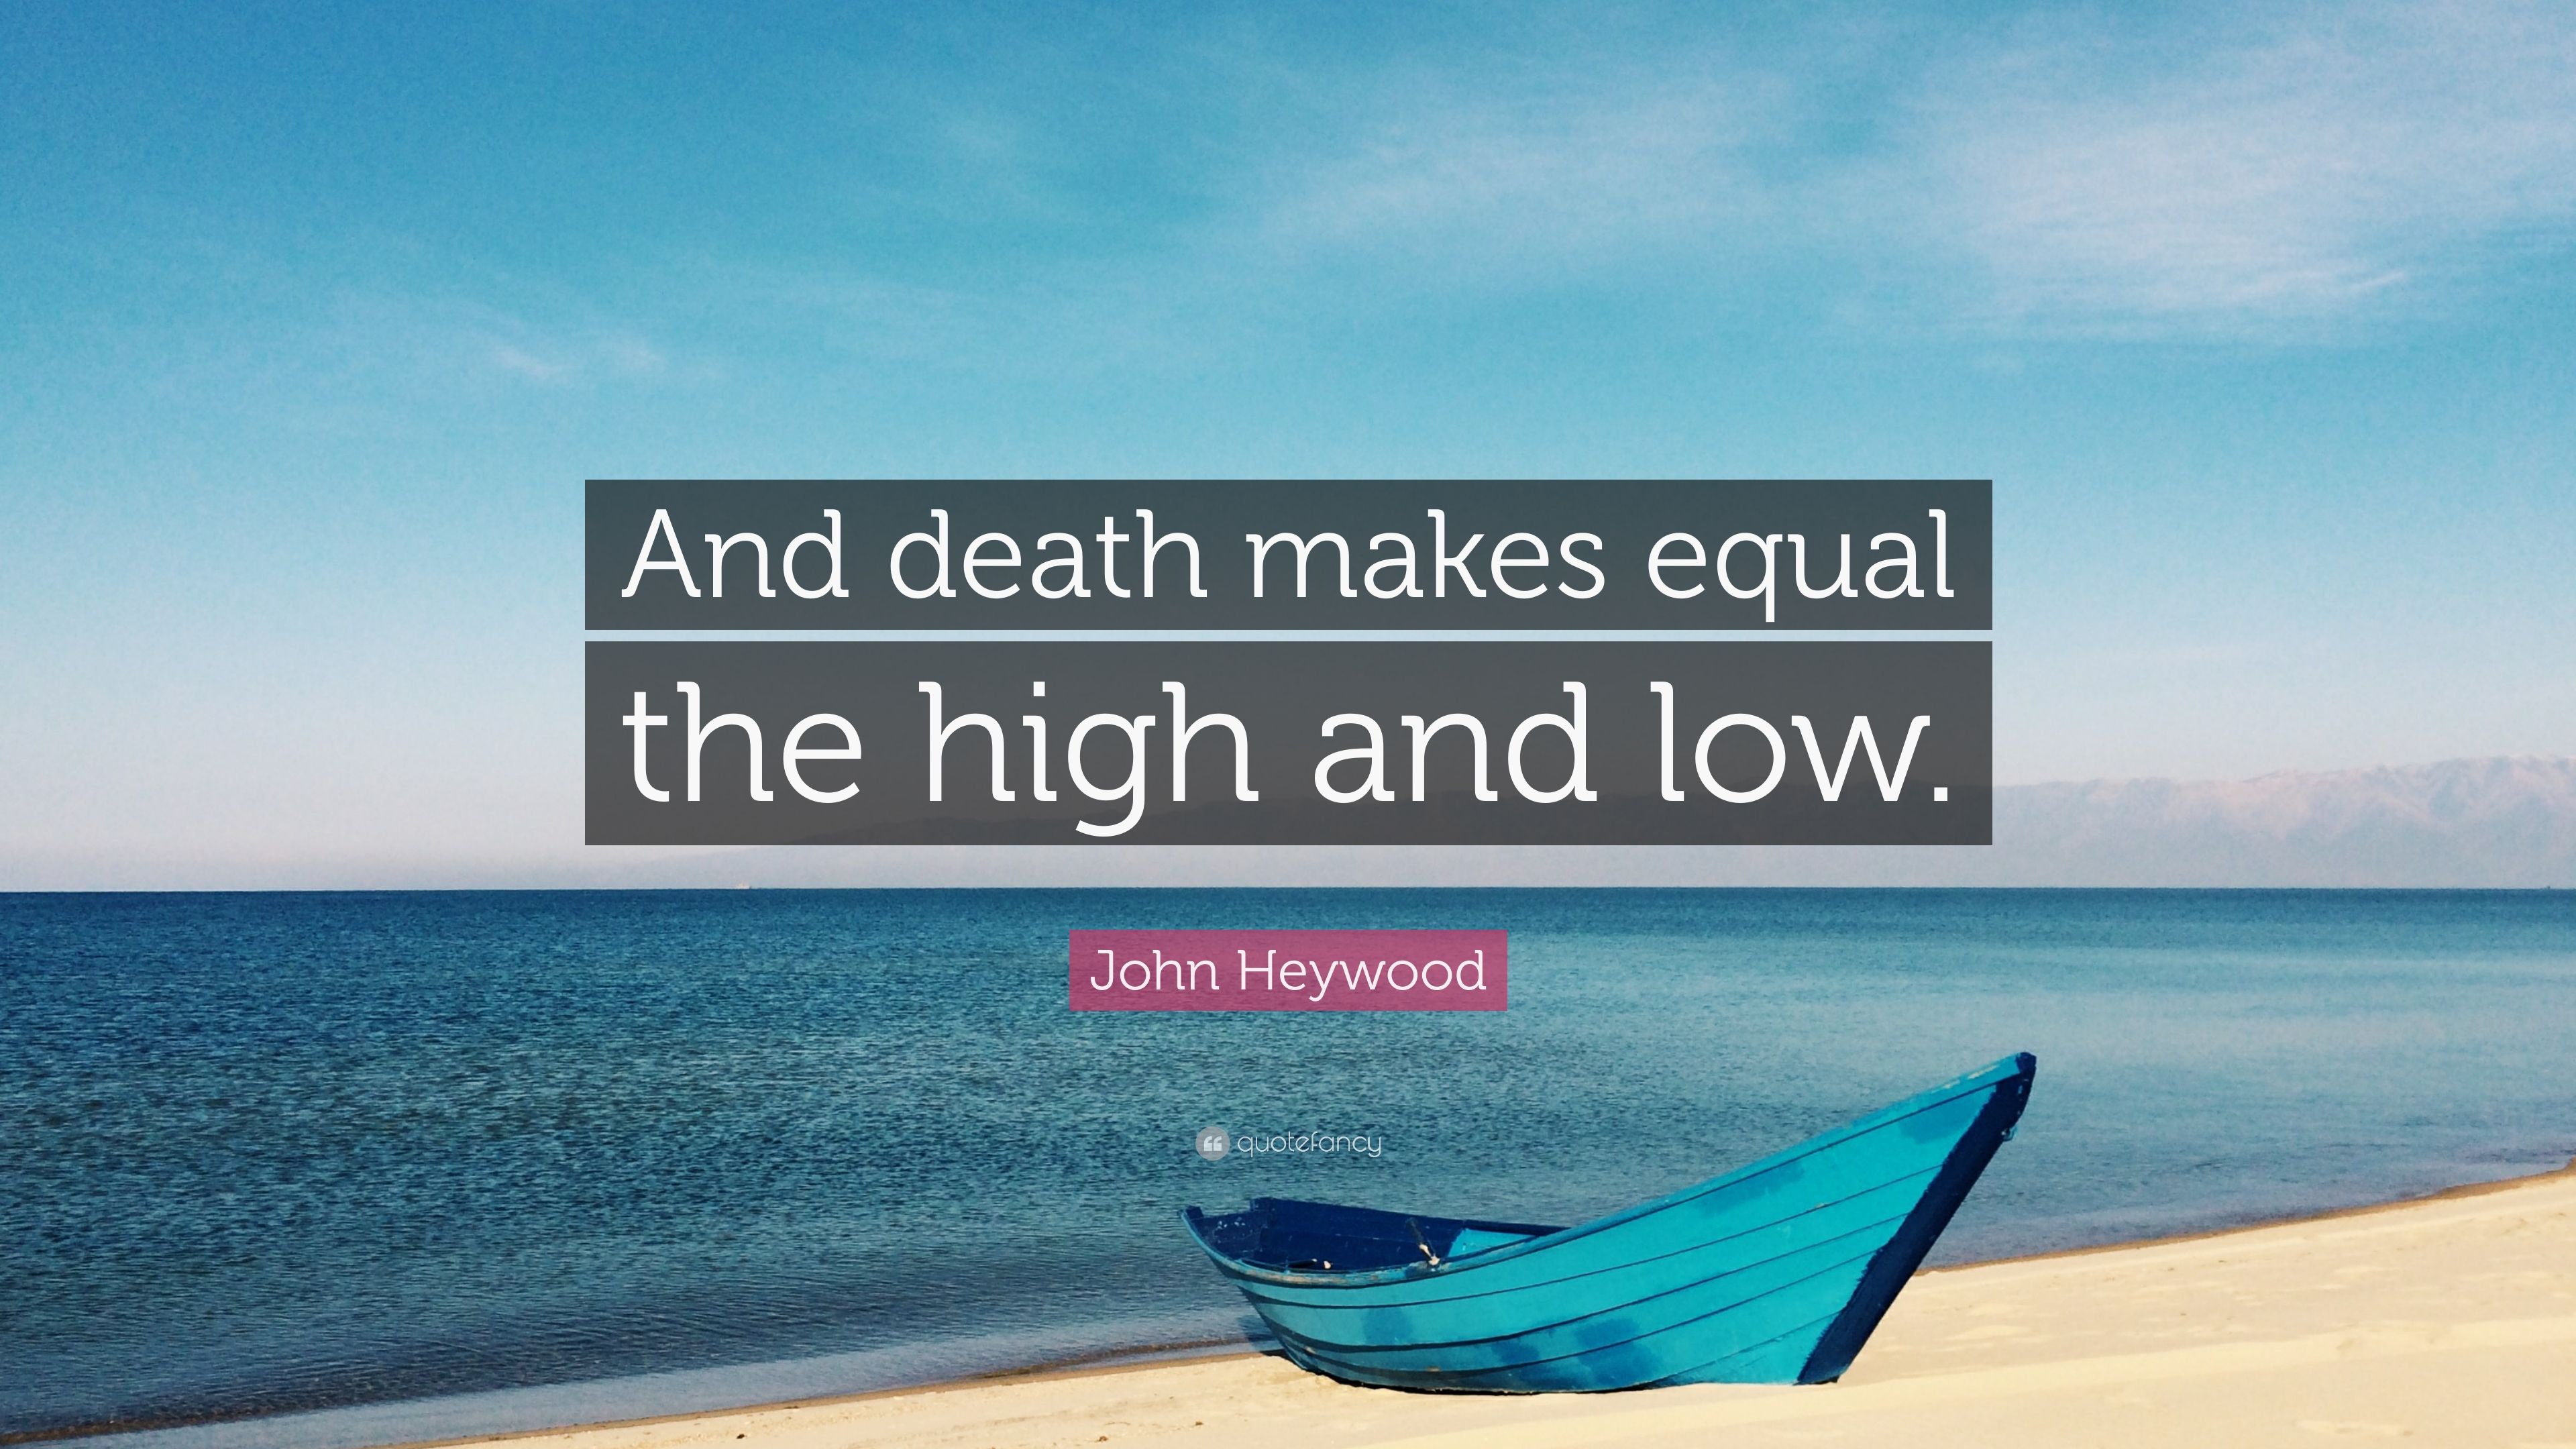 John Heywood Quote: “And death makes equal the high and low.” 7